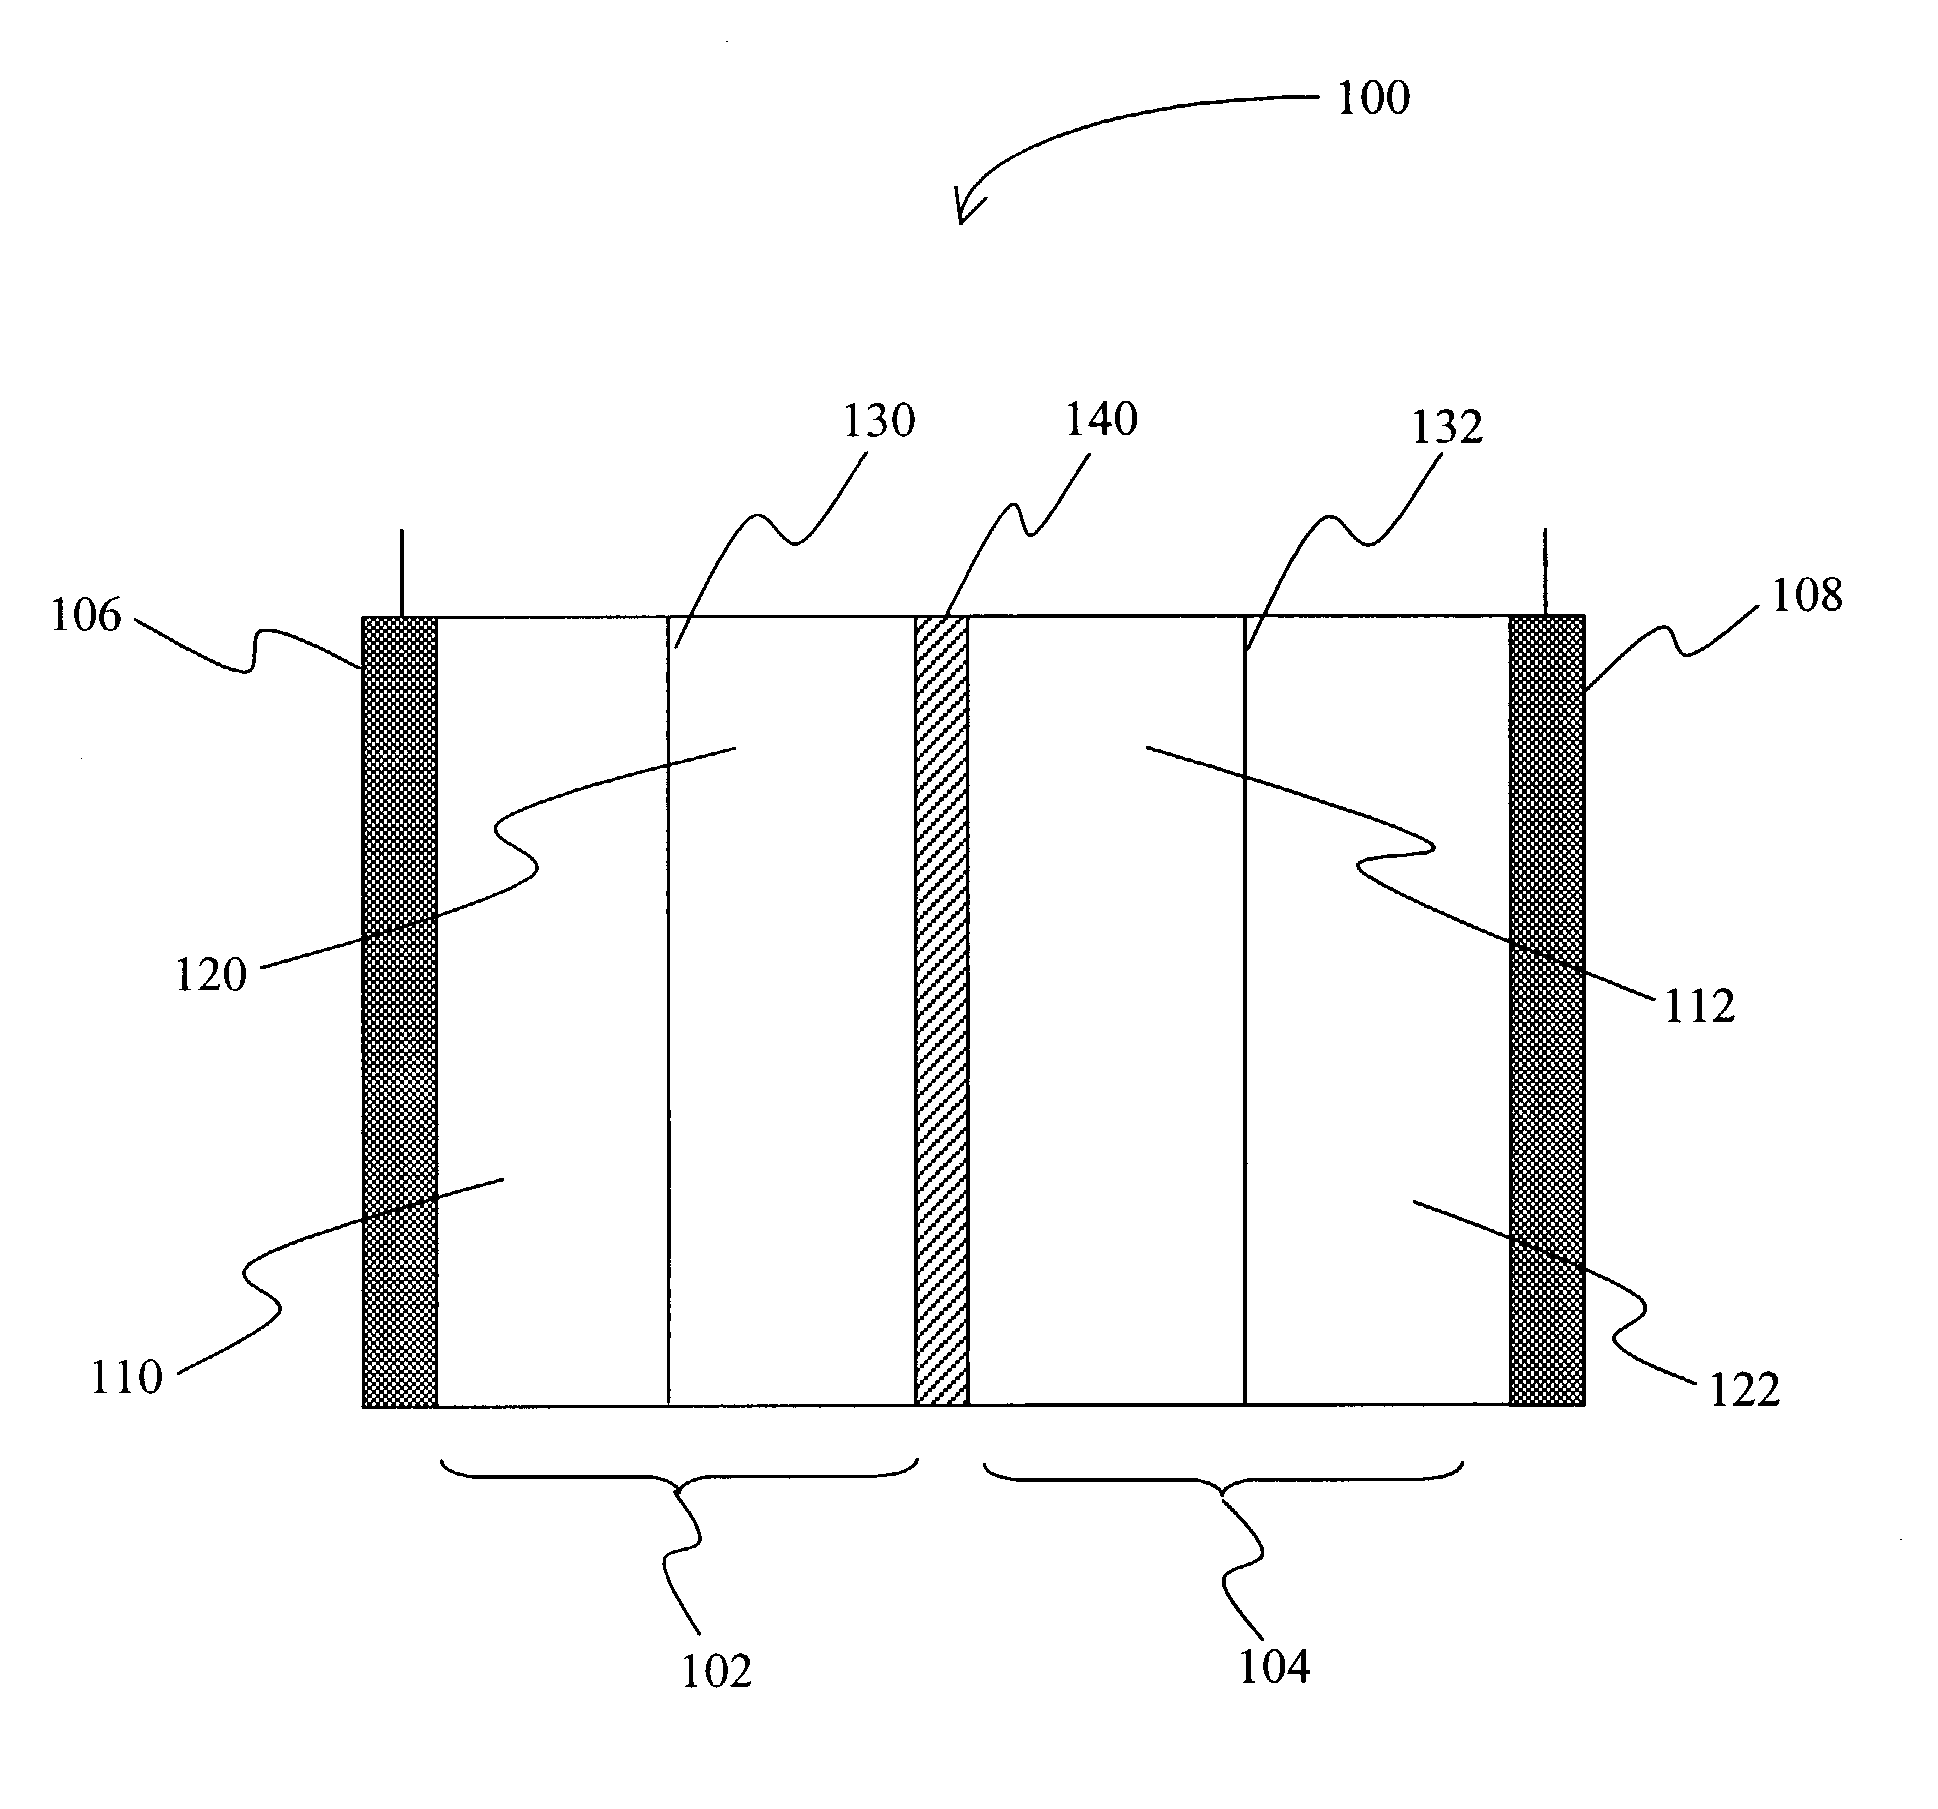 Electric devices with improved bipolar electrode